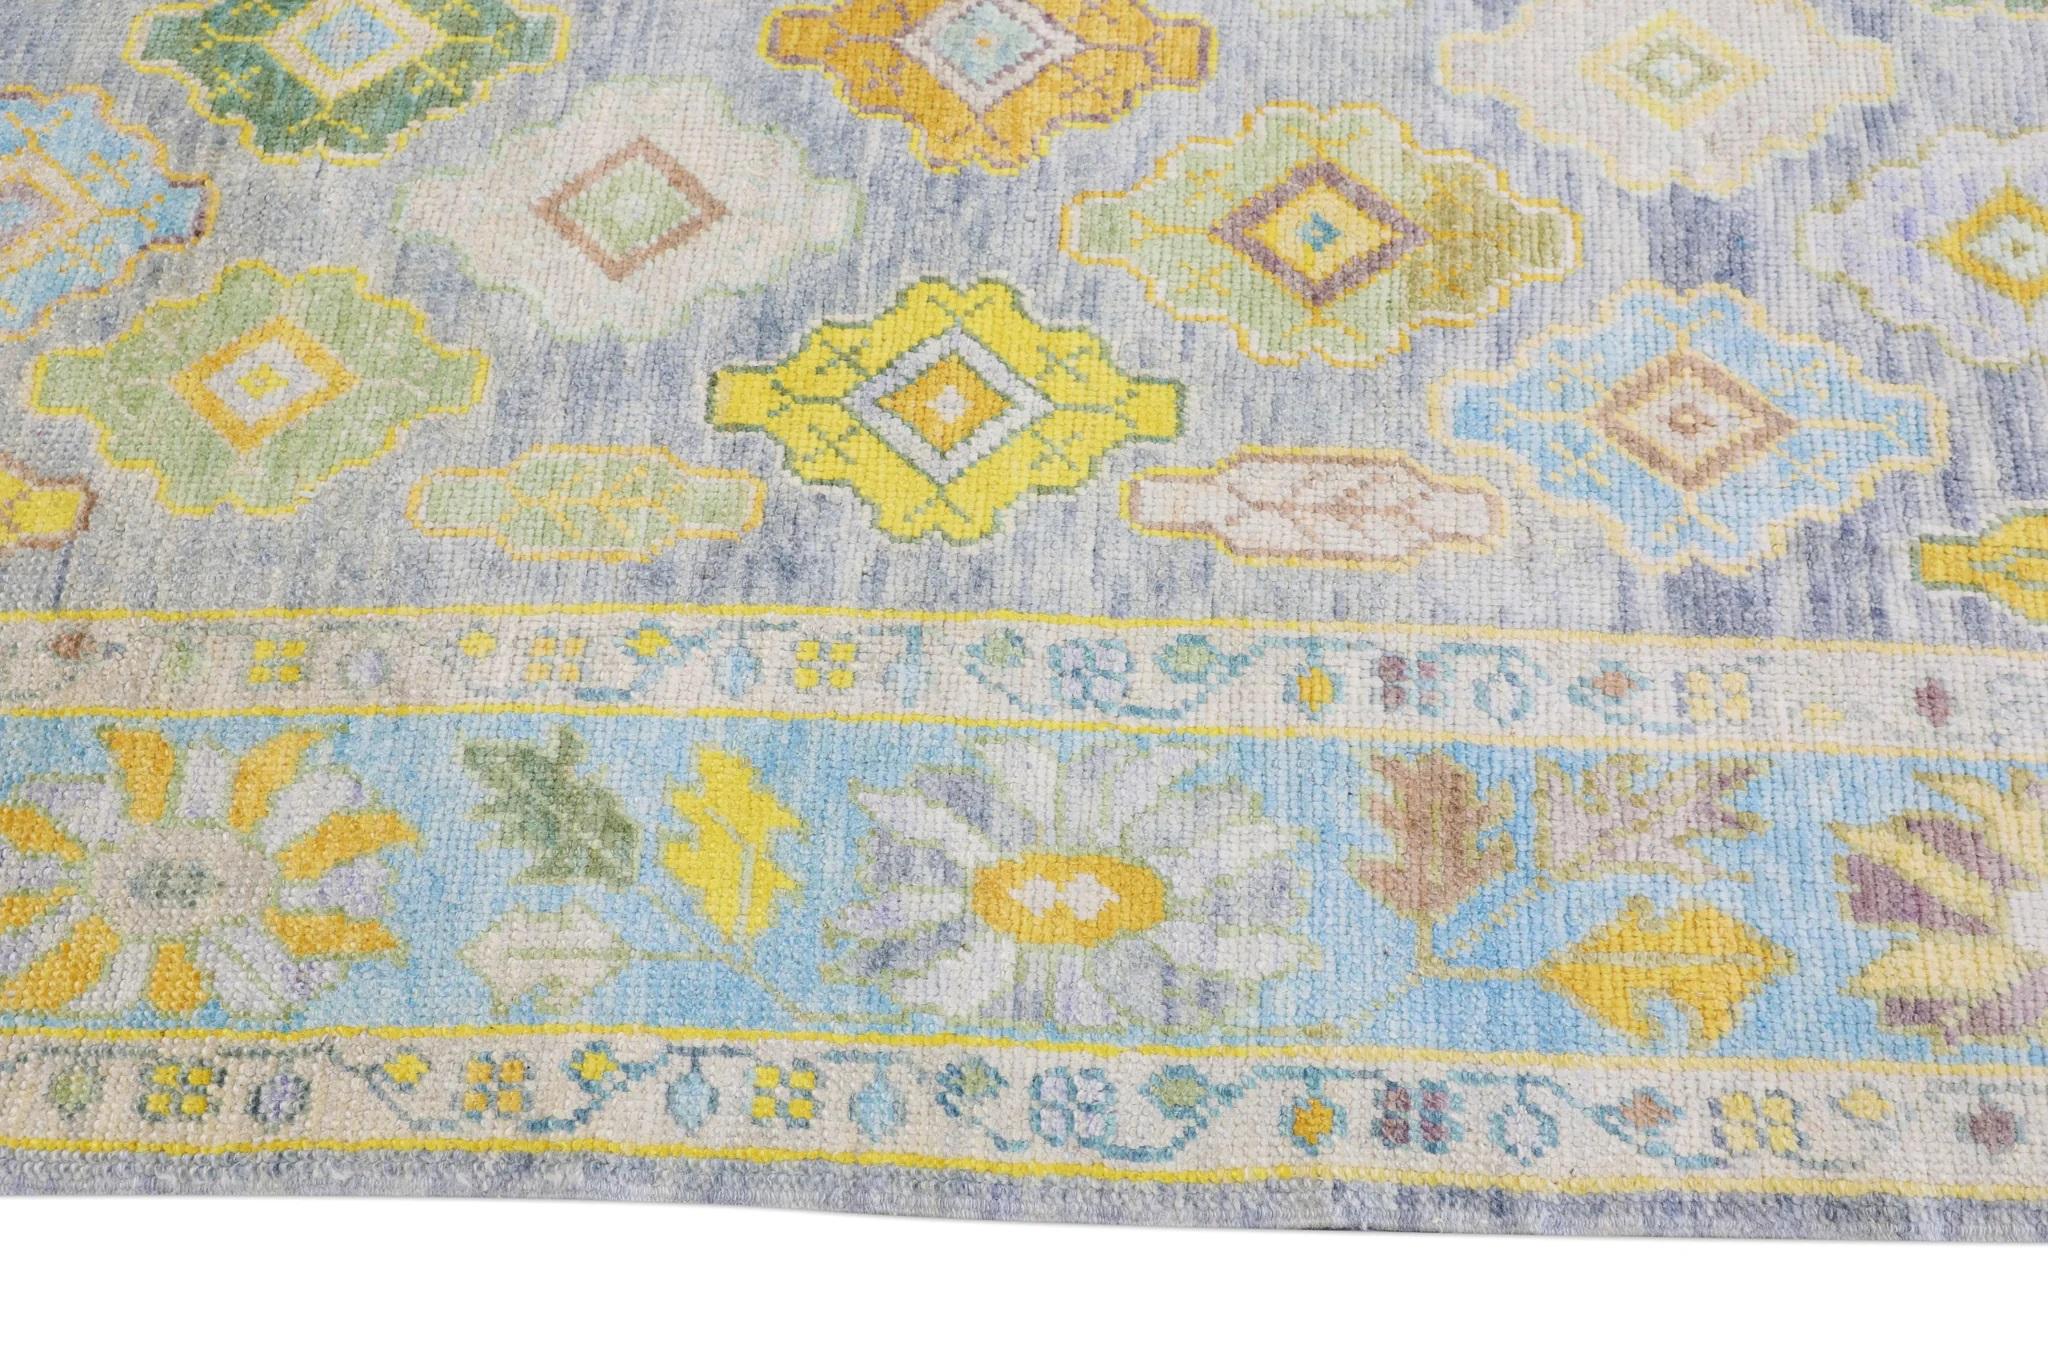 Contemporary Handwoven Wool Floral Turkish Oushak Rug in Blue, Green, and Yellow 8'1